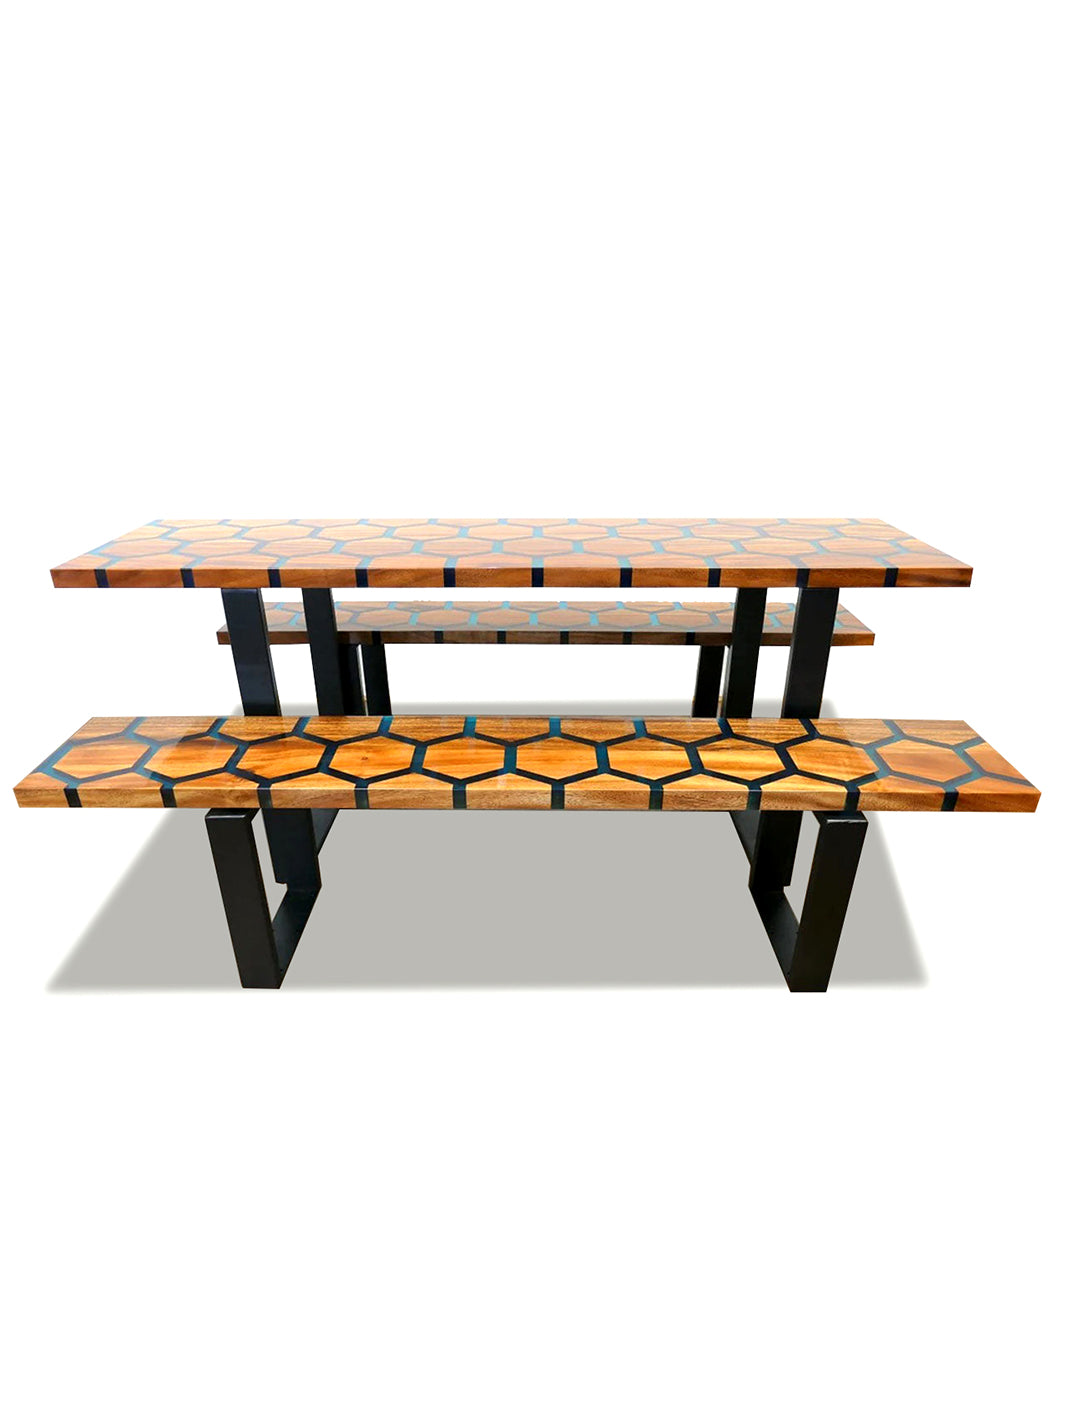 Handcrafted Rosewood Slab Epoxy Resin Wooden Dining Table & Benches Made 4 Decor Tables MDR0003